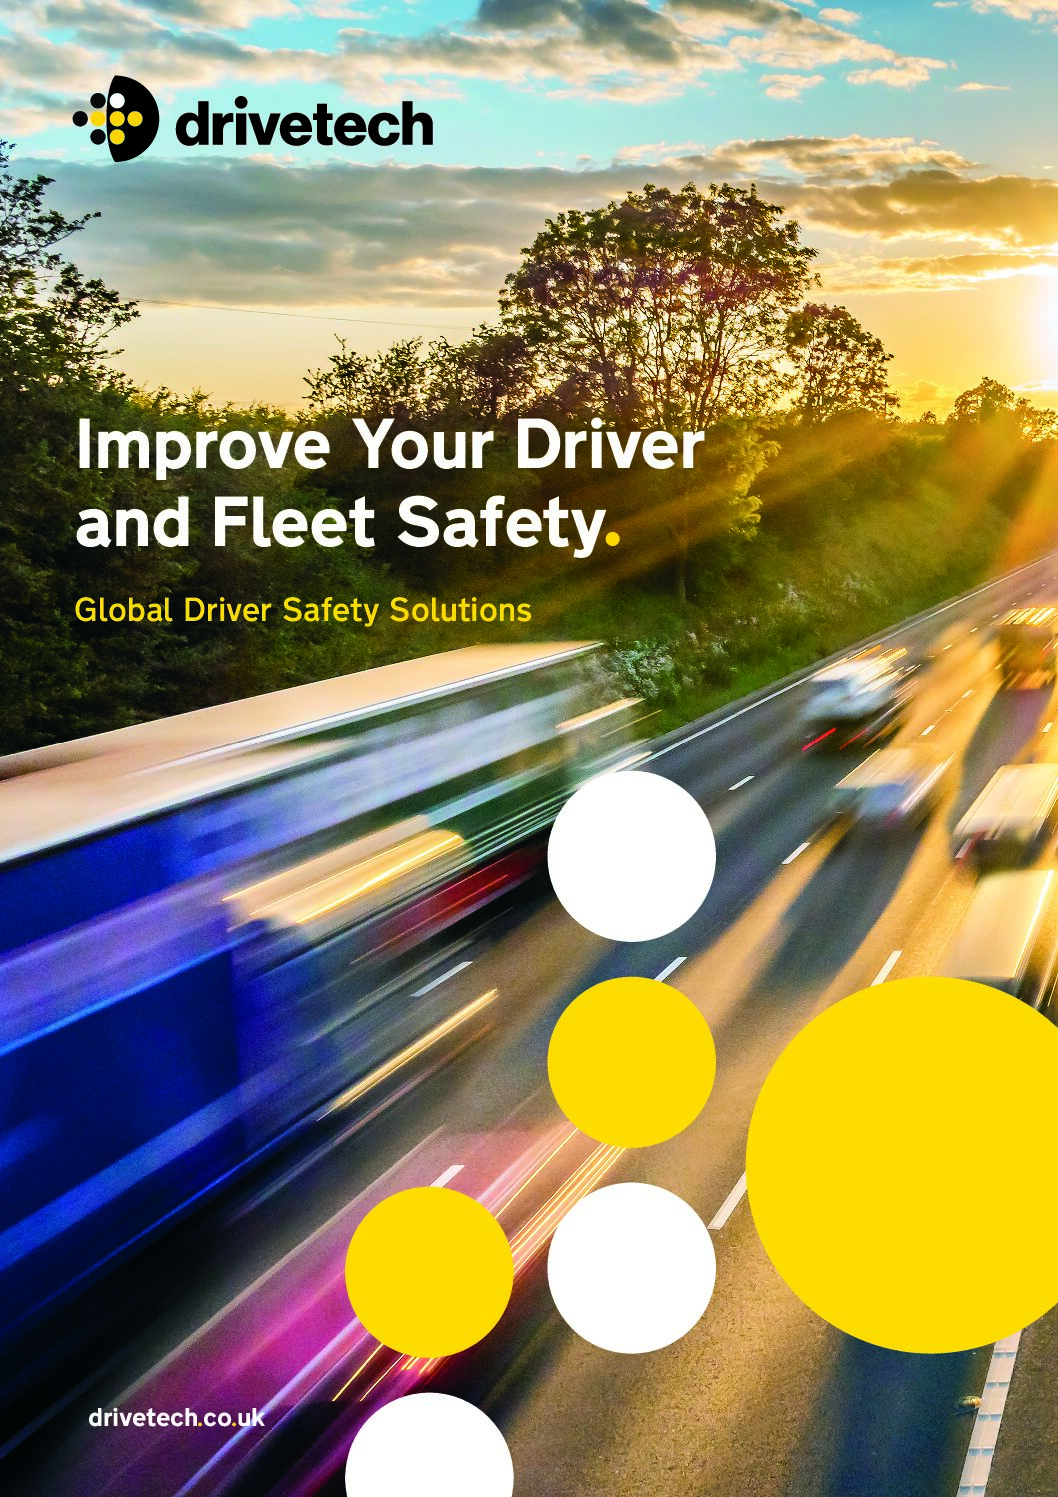 Drivetech International | Global Driver Safety Solutions